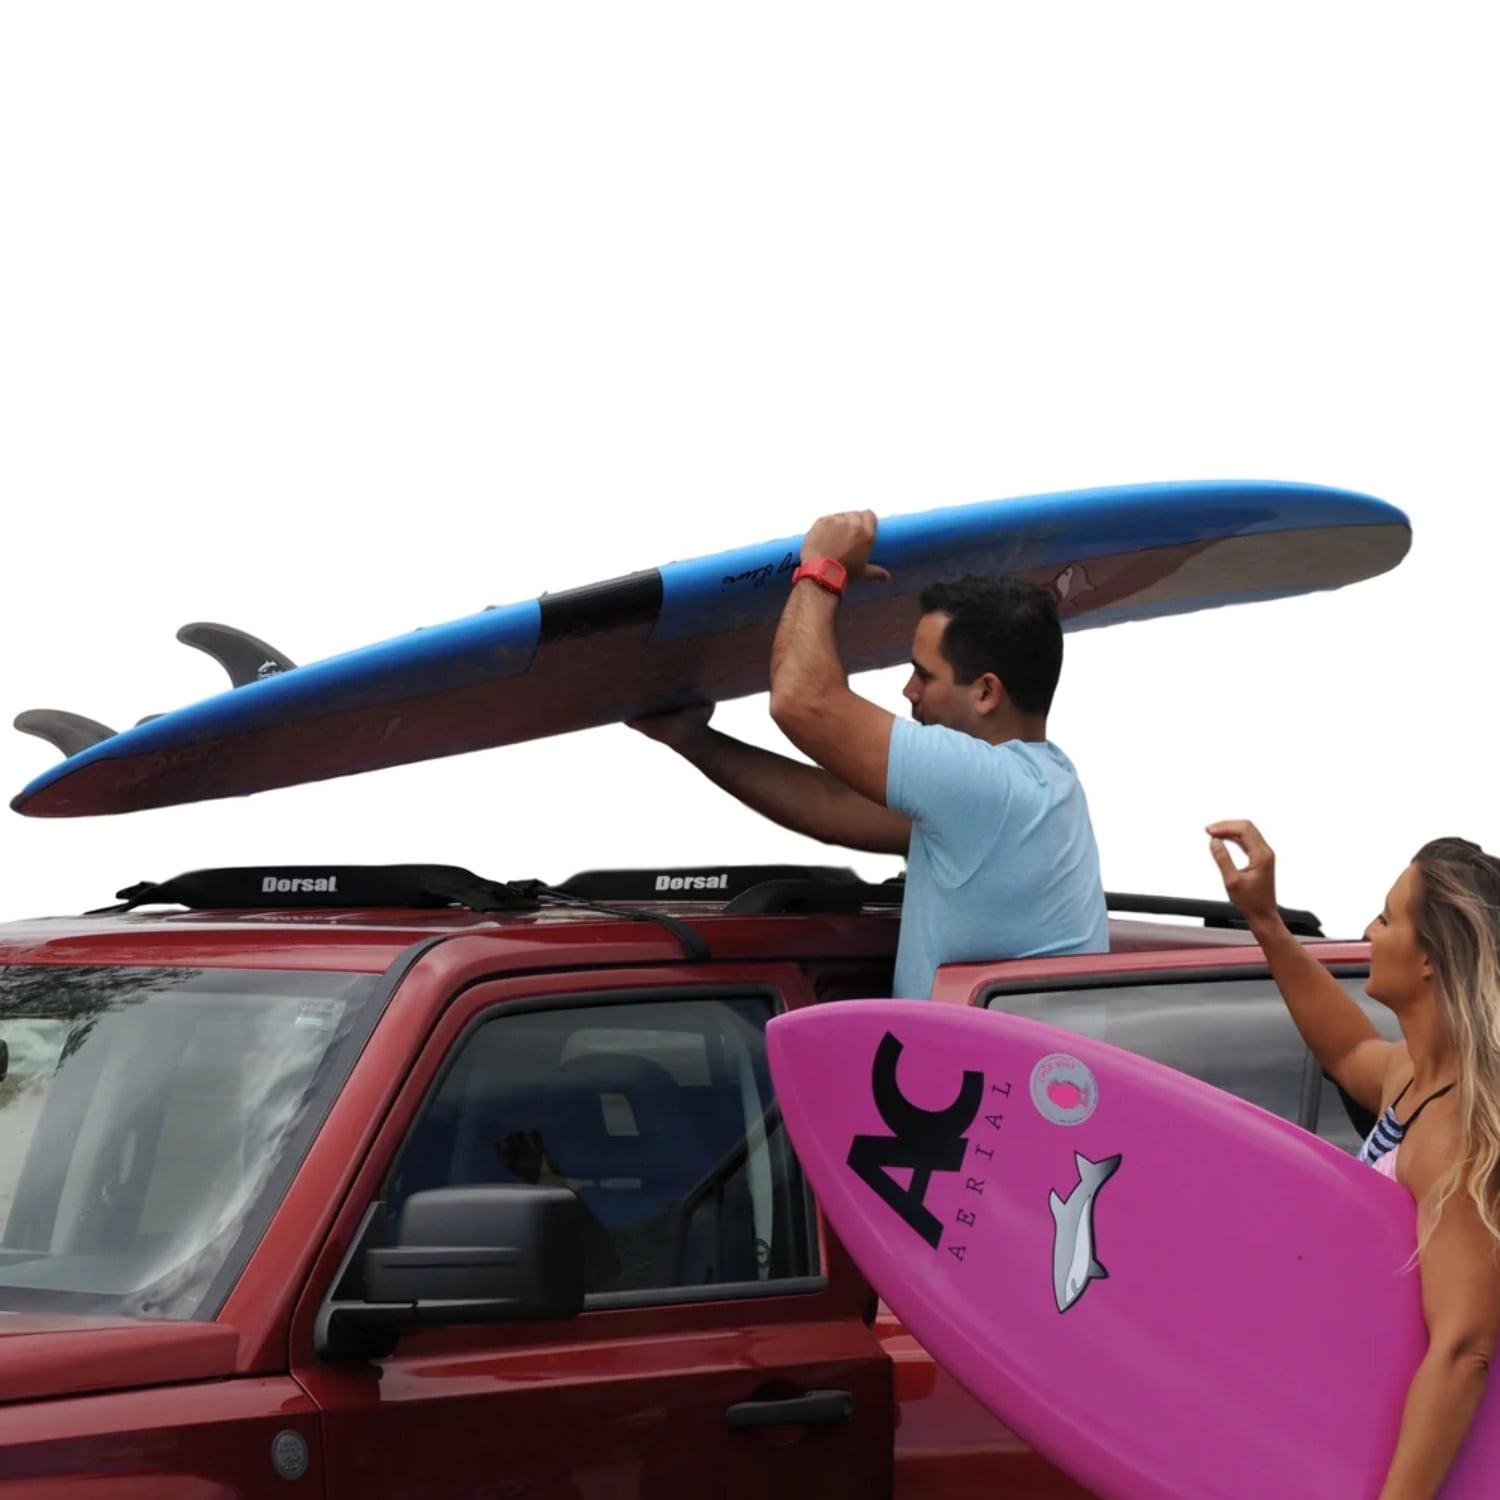 28” Premium Car Carrier Racks for Kayak Surfboard SUP Paddleboard Black/Blue Snowboard LINGVUM Soft Roof Rack Pads with Two 15 Ft Wrap-Rax Straps 